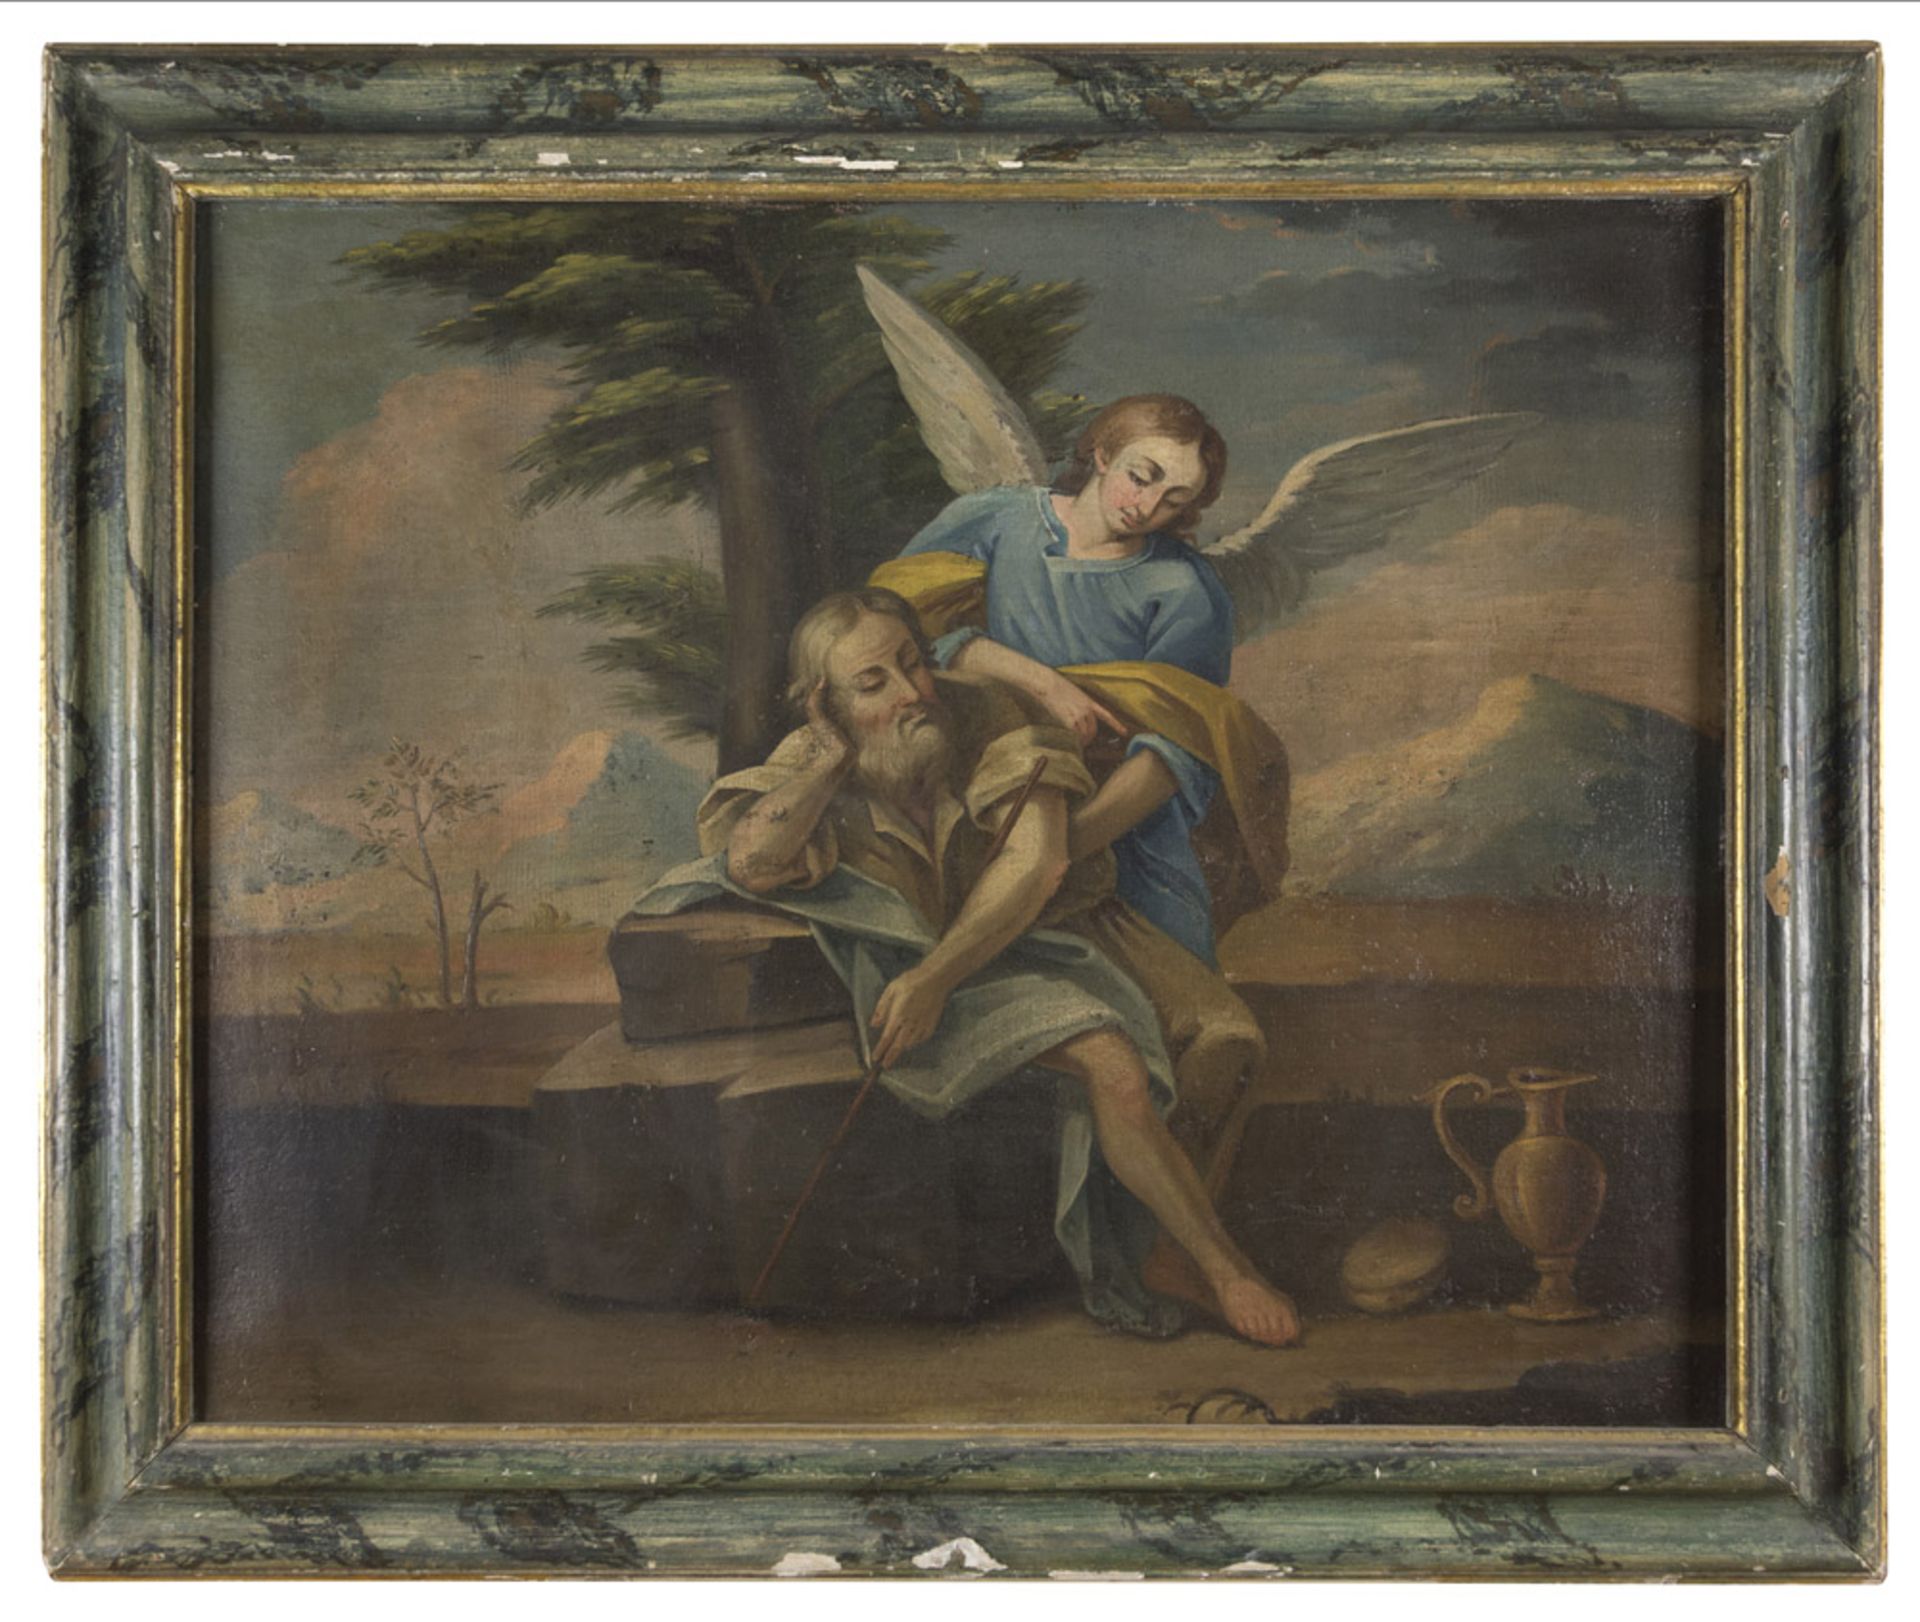 NORTHERN ITALY PAINTER, 18TH CENTURY ELIAS AND THE ANGEL Oil on canvas cm. 77 x 97 CONDITION Late